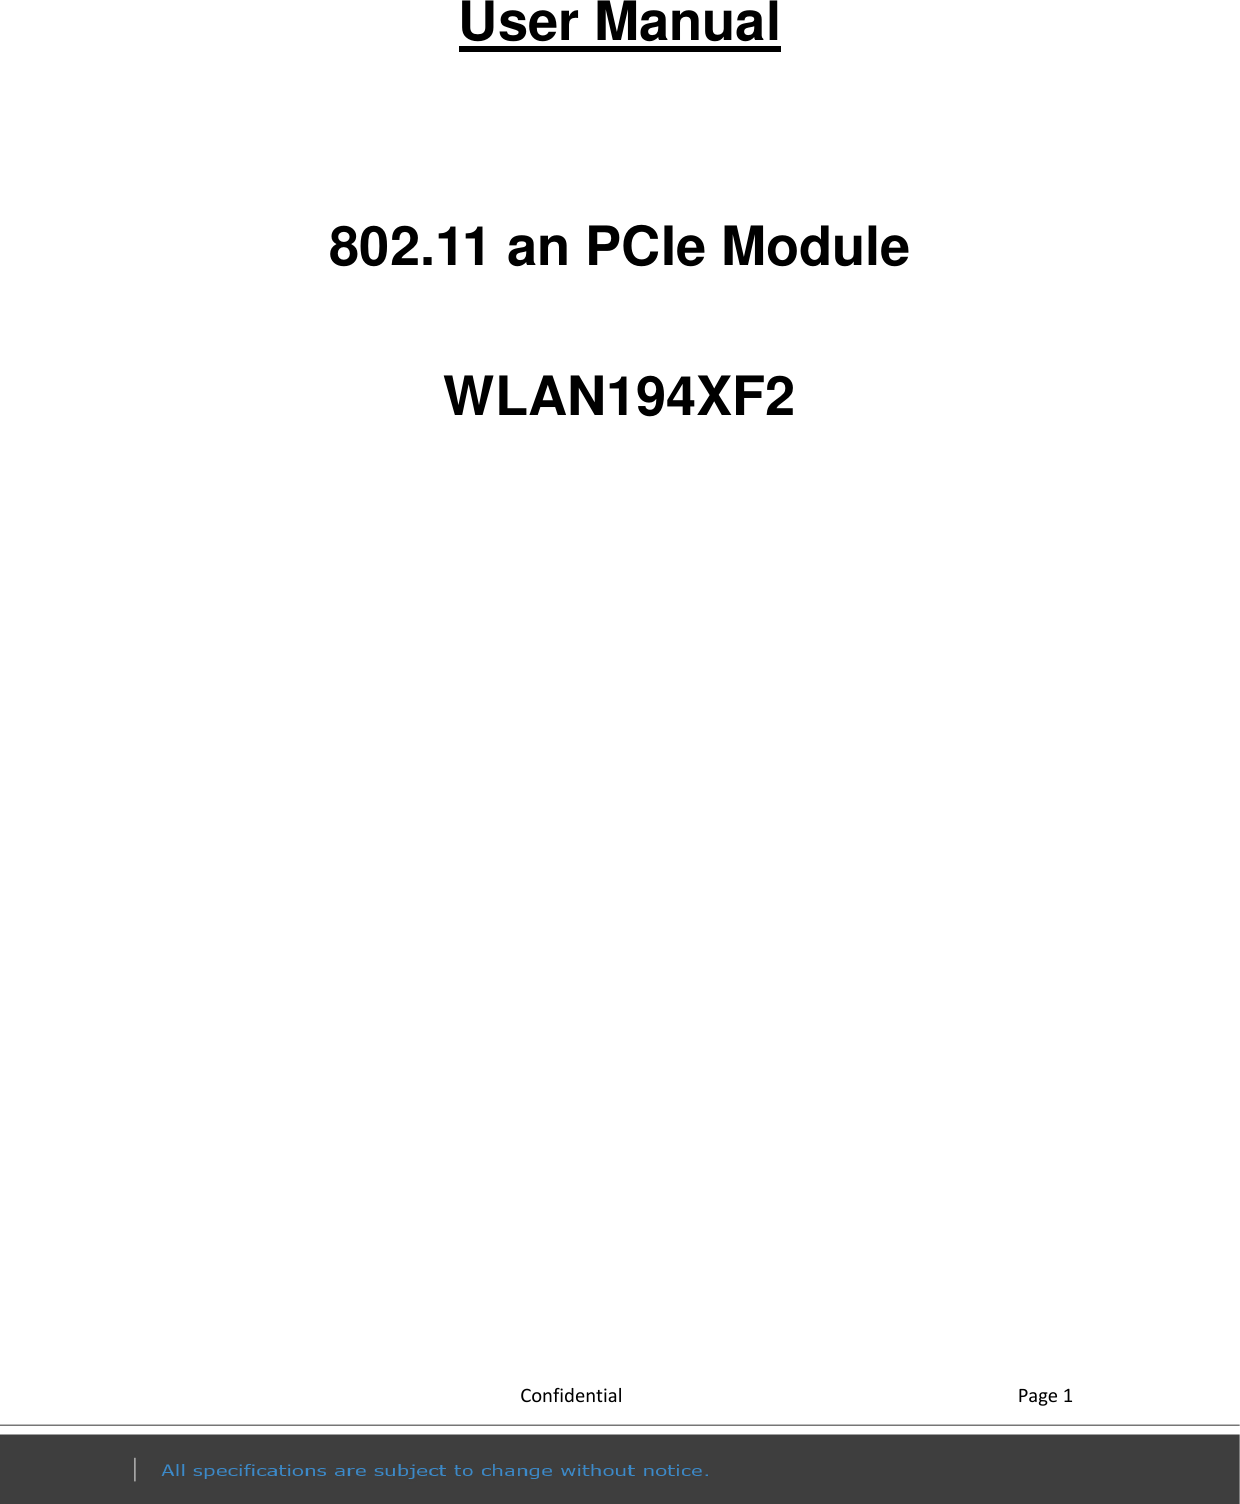           Confidential    Page 1 User Manual   802.11 an PCIe Module  WLAN194XF2 